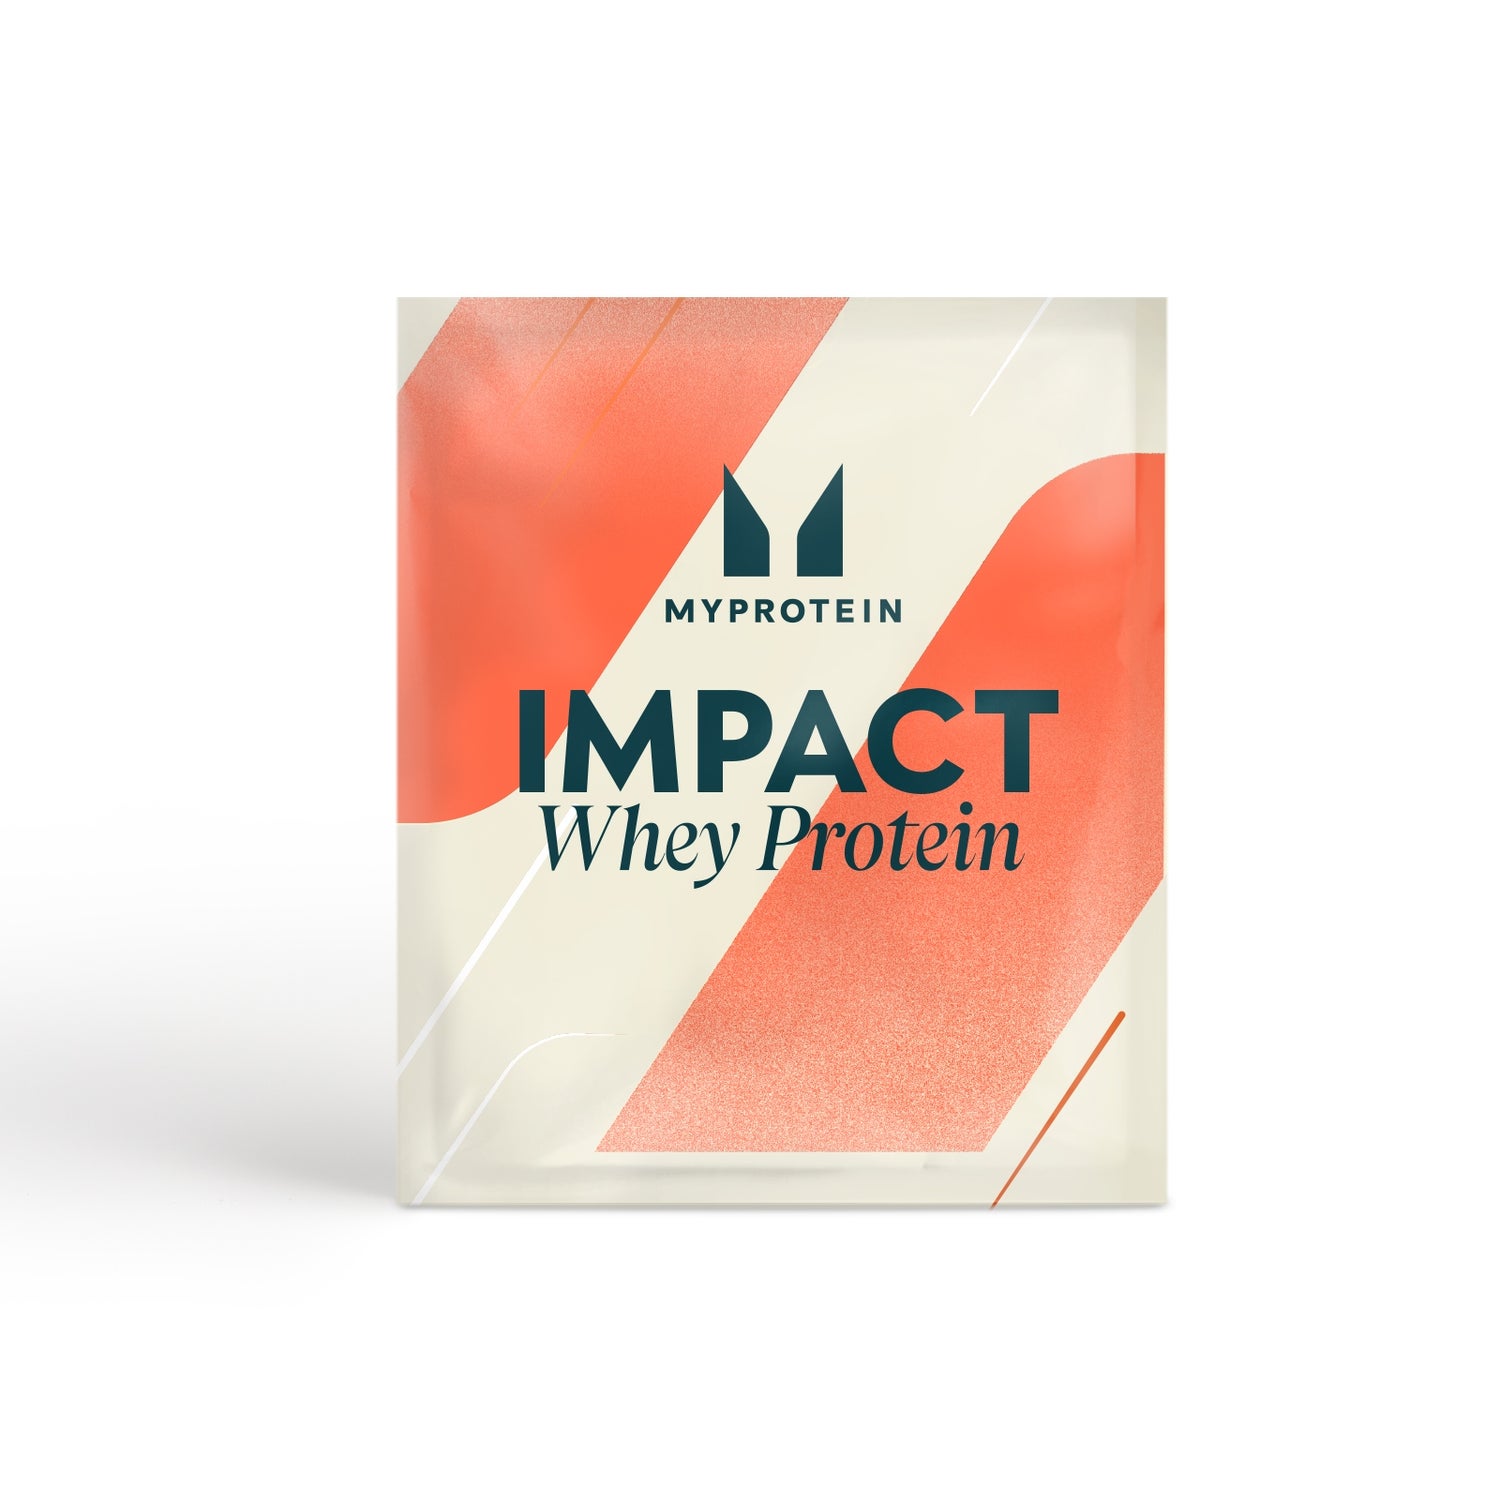 Impact Whey Protein (Sample) - 25g - Chocolate Smooth